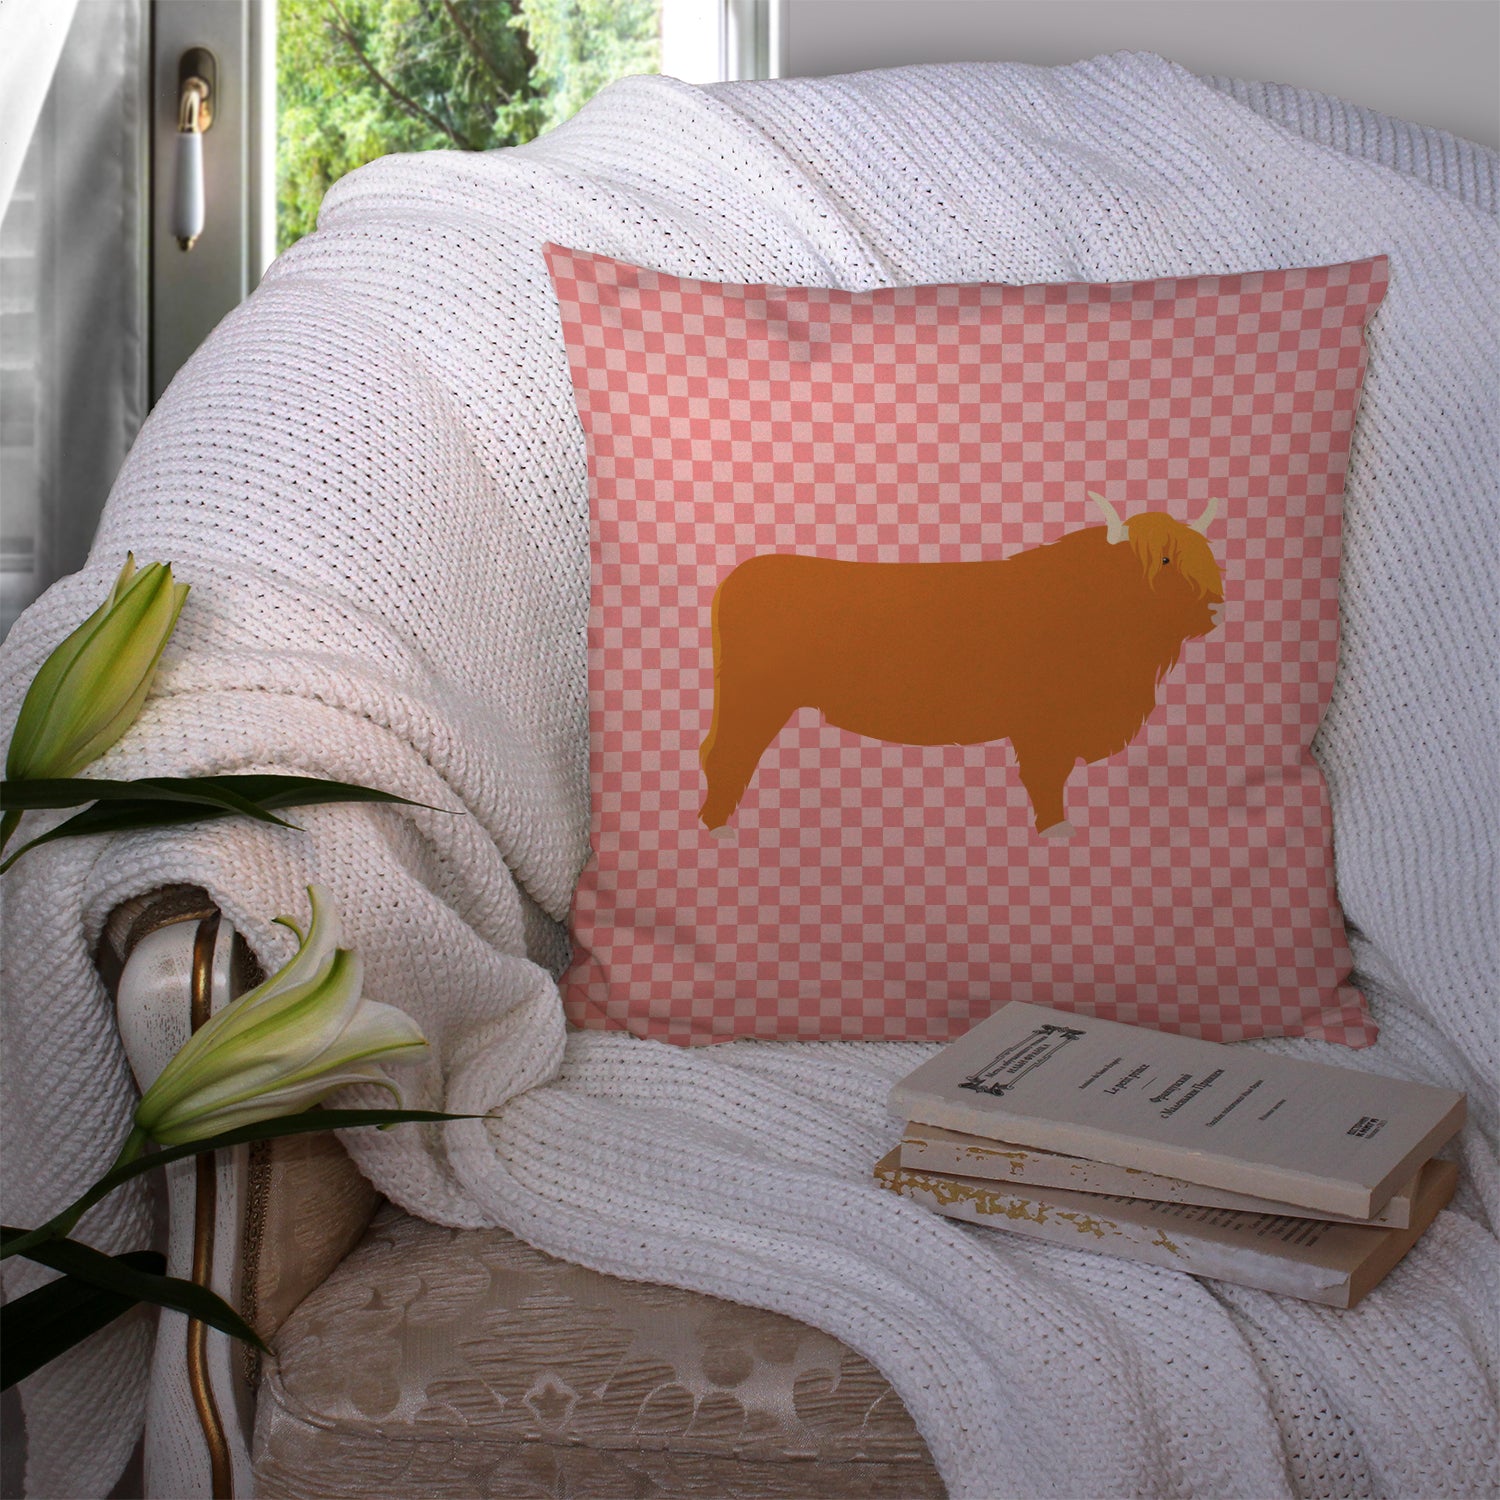 Highland Cow Pink Check Fabric Decorative Pillow BB7820PW1414 - the-store.com